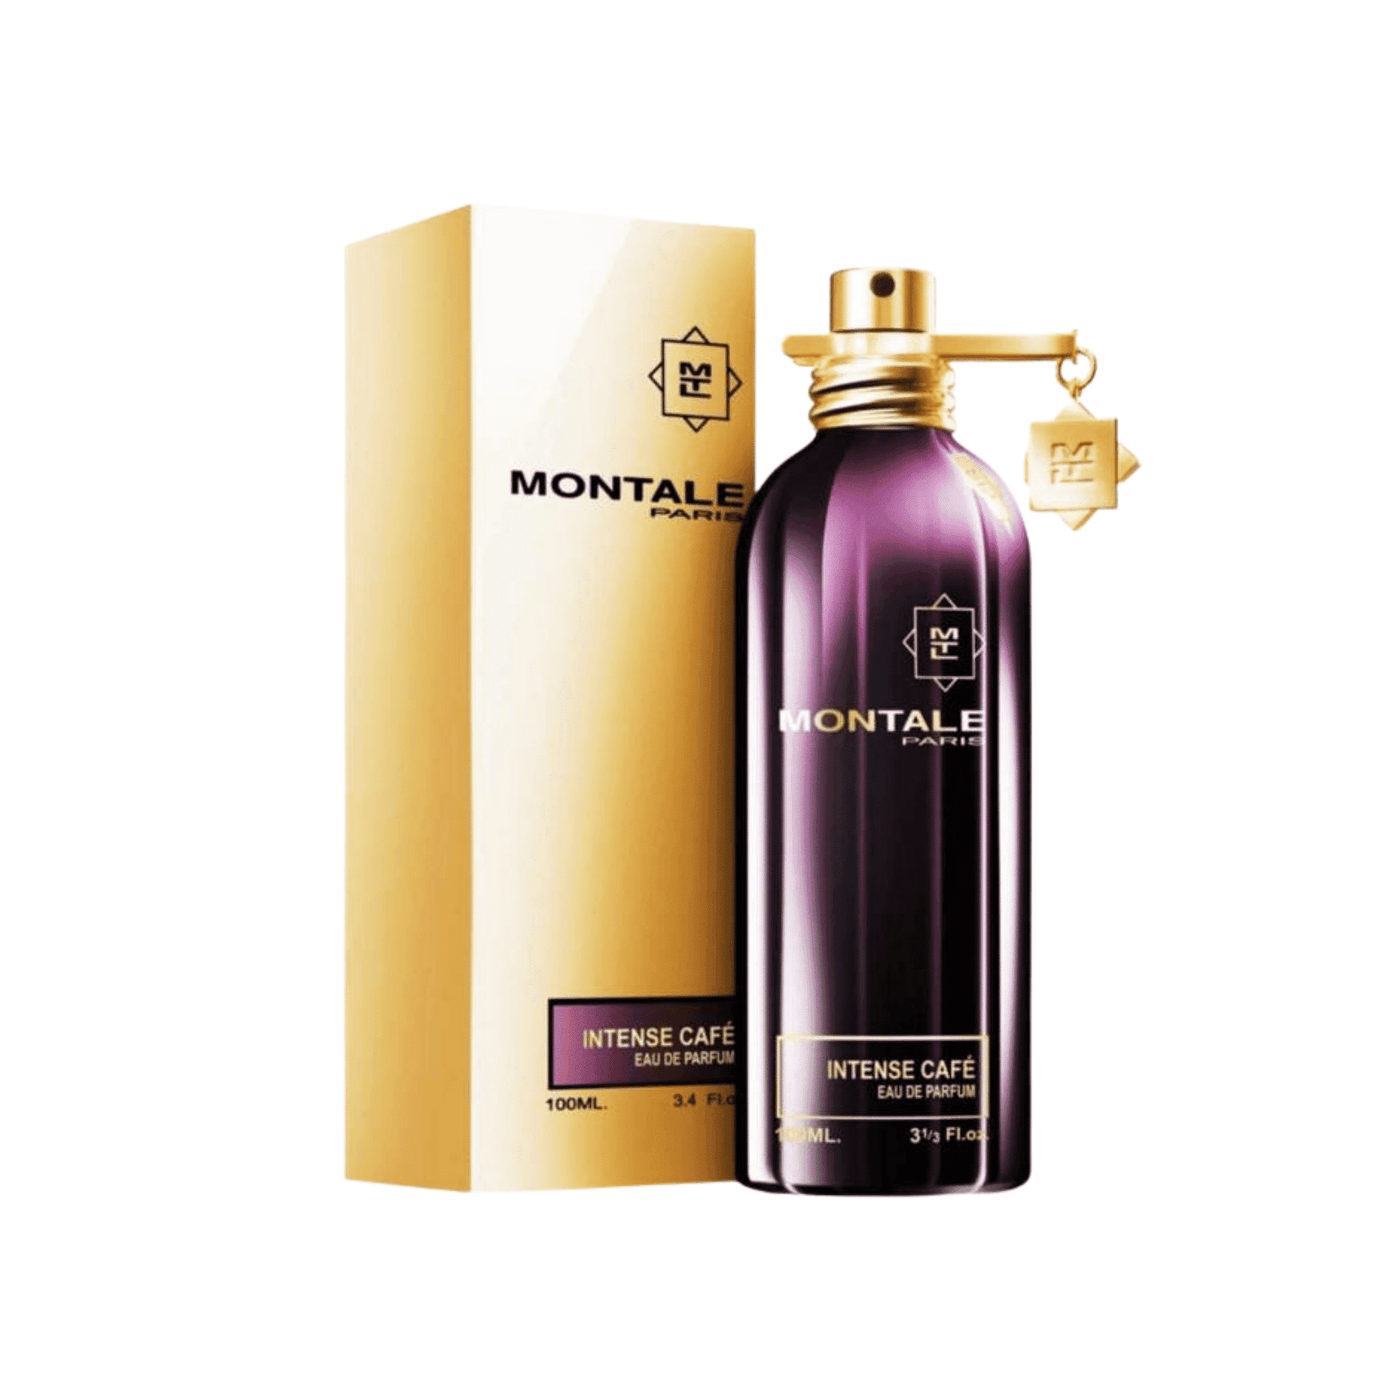 Montale intense cafe perfume